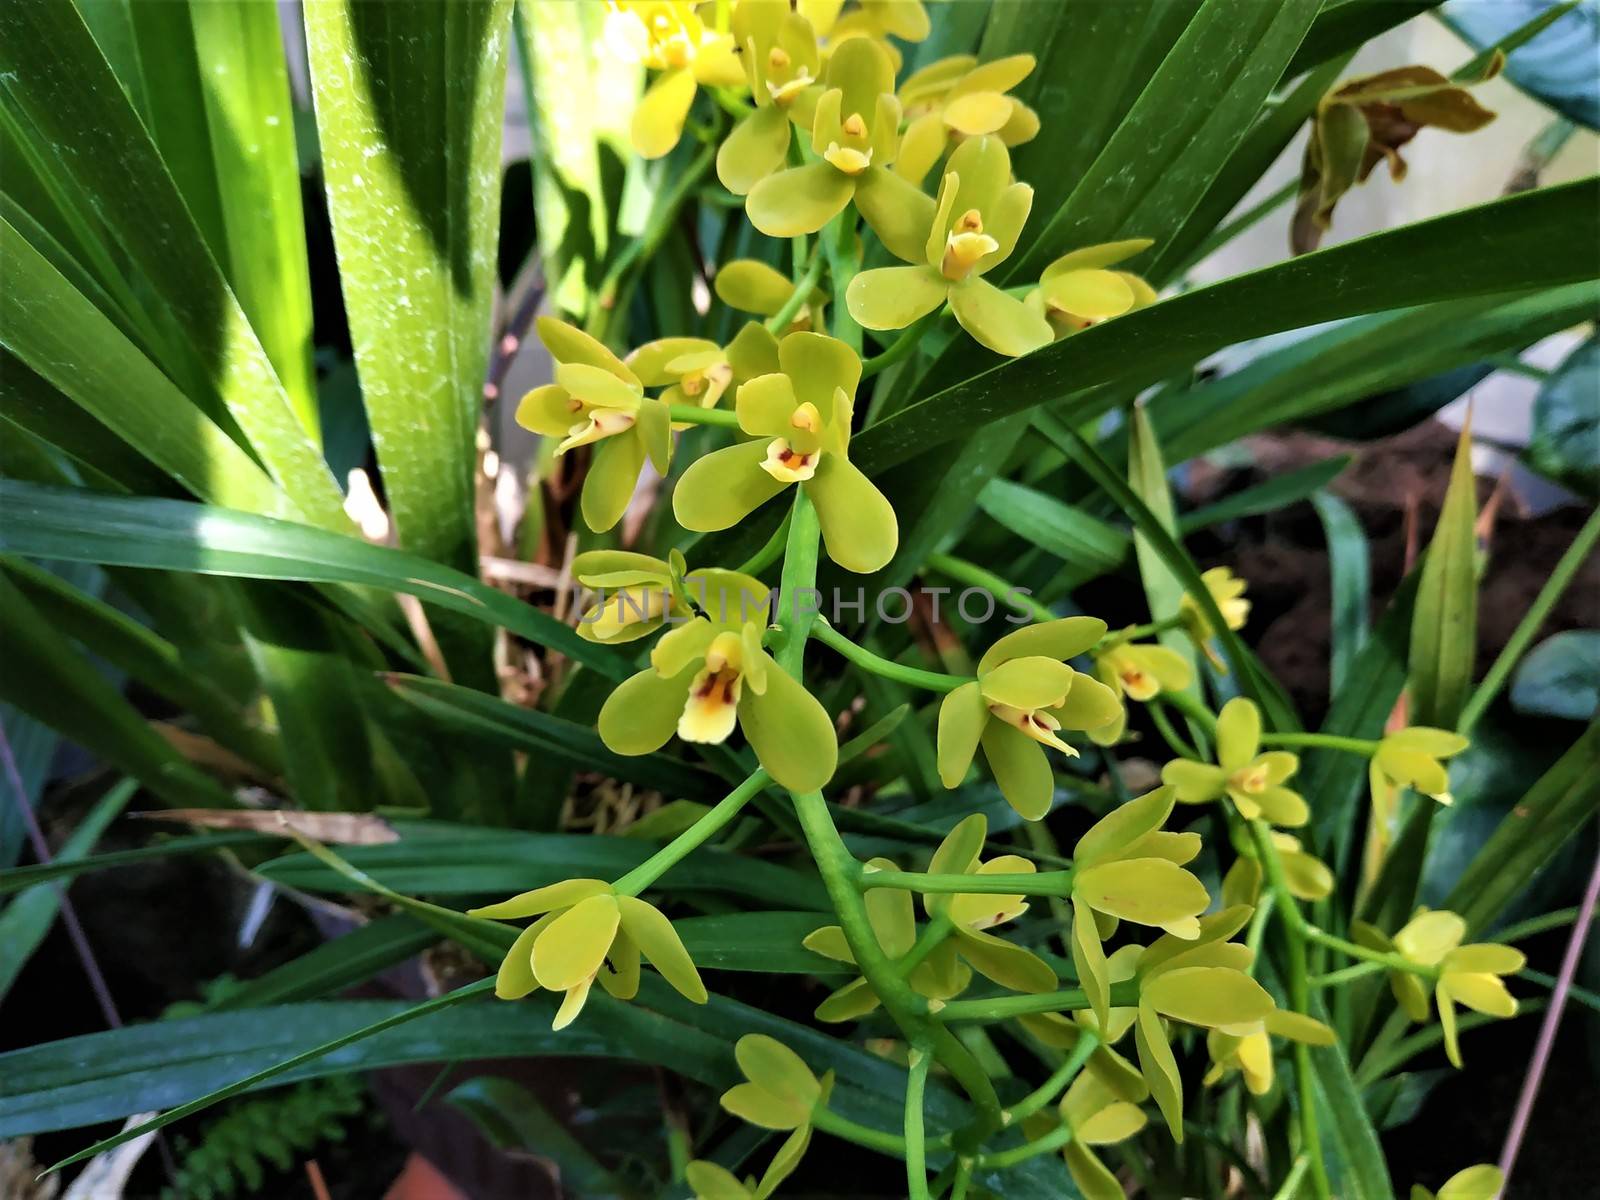 Nice Cymbidium orchid with small yellow-greenish blossoms in greenhouse